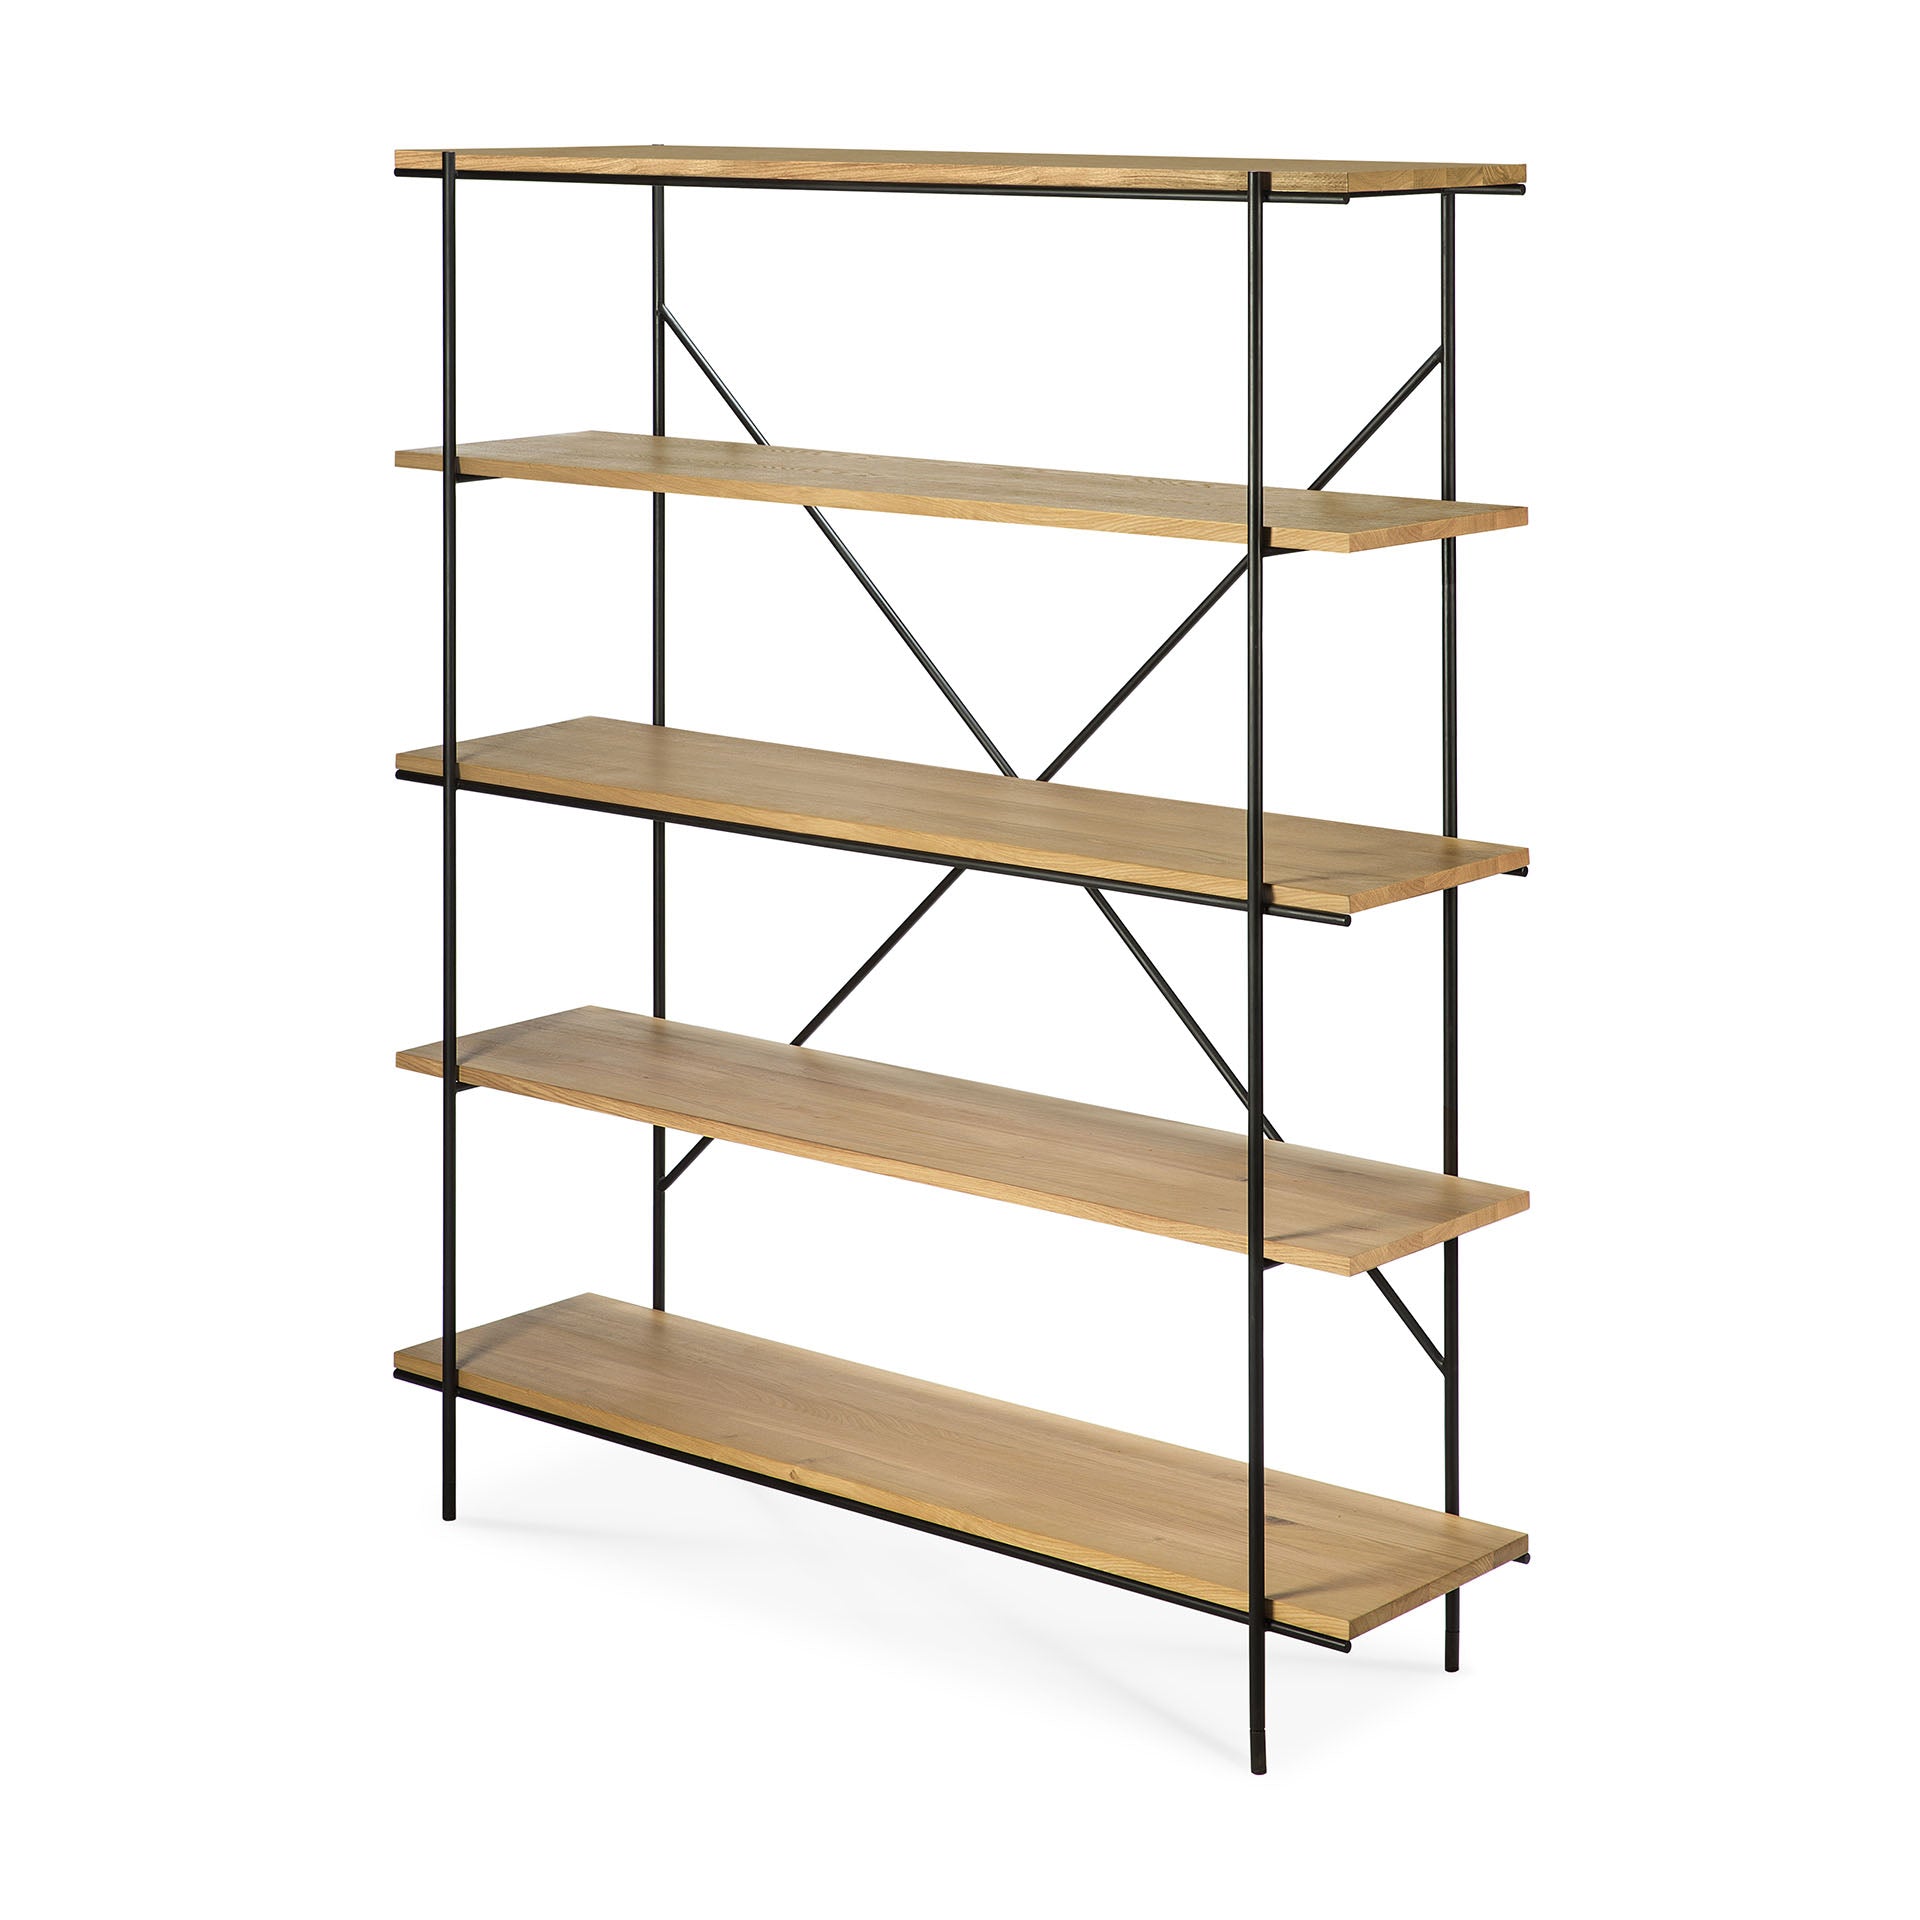 Ethnicraft Oak Rise Rack Bookcase available from Make Your House A Home, Bendigo, Victoria, Australia